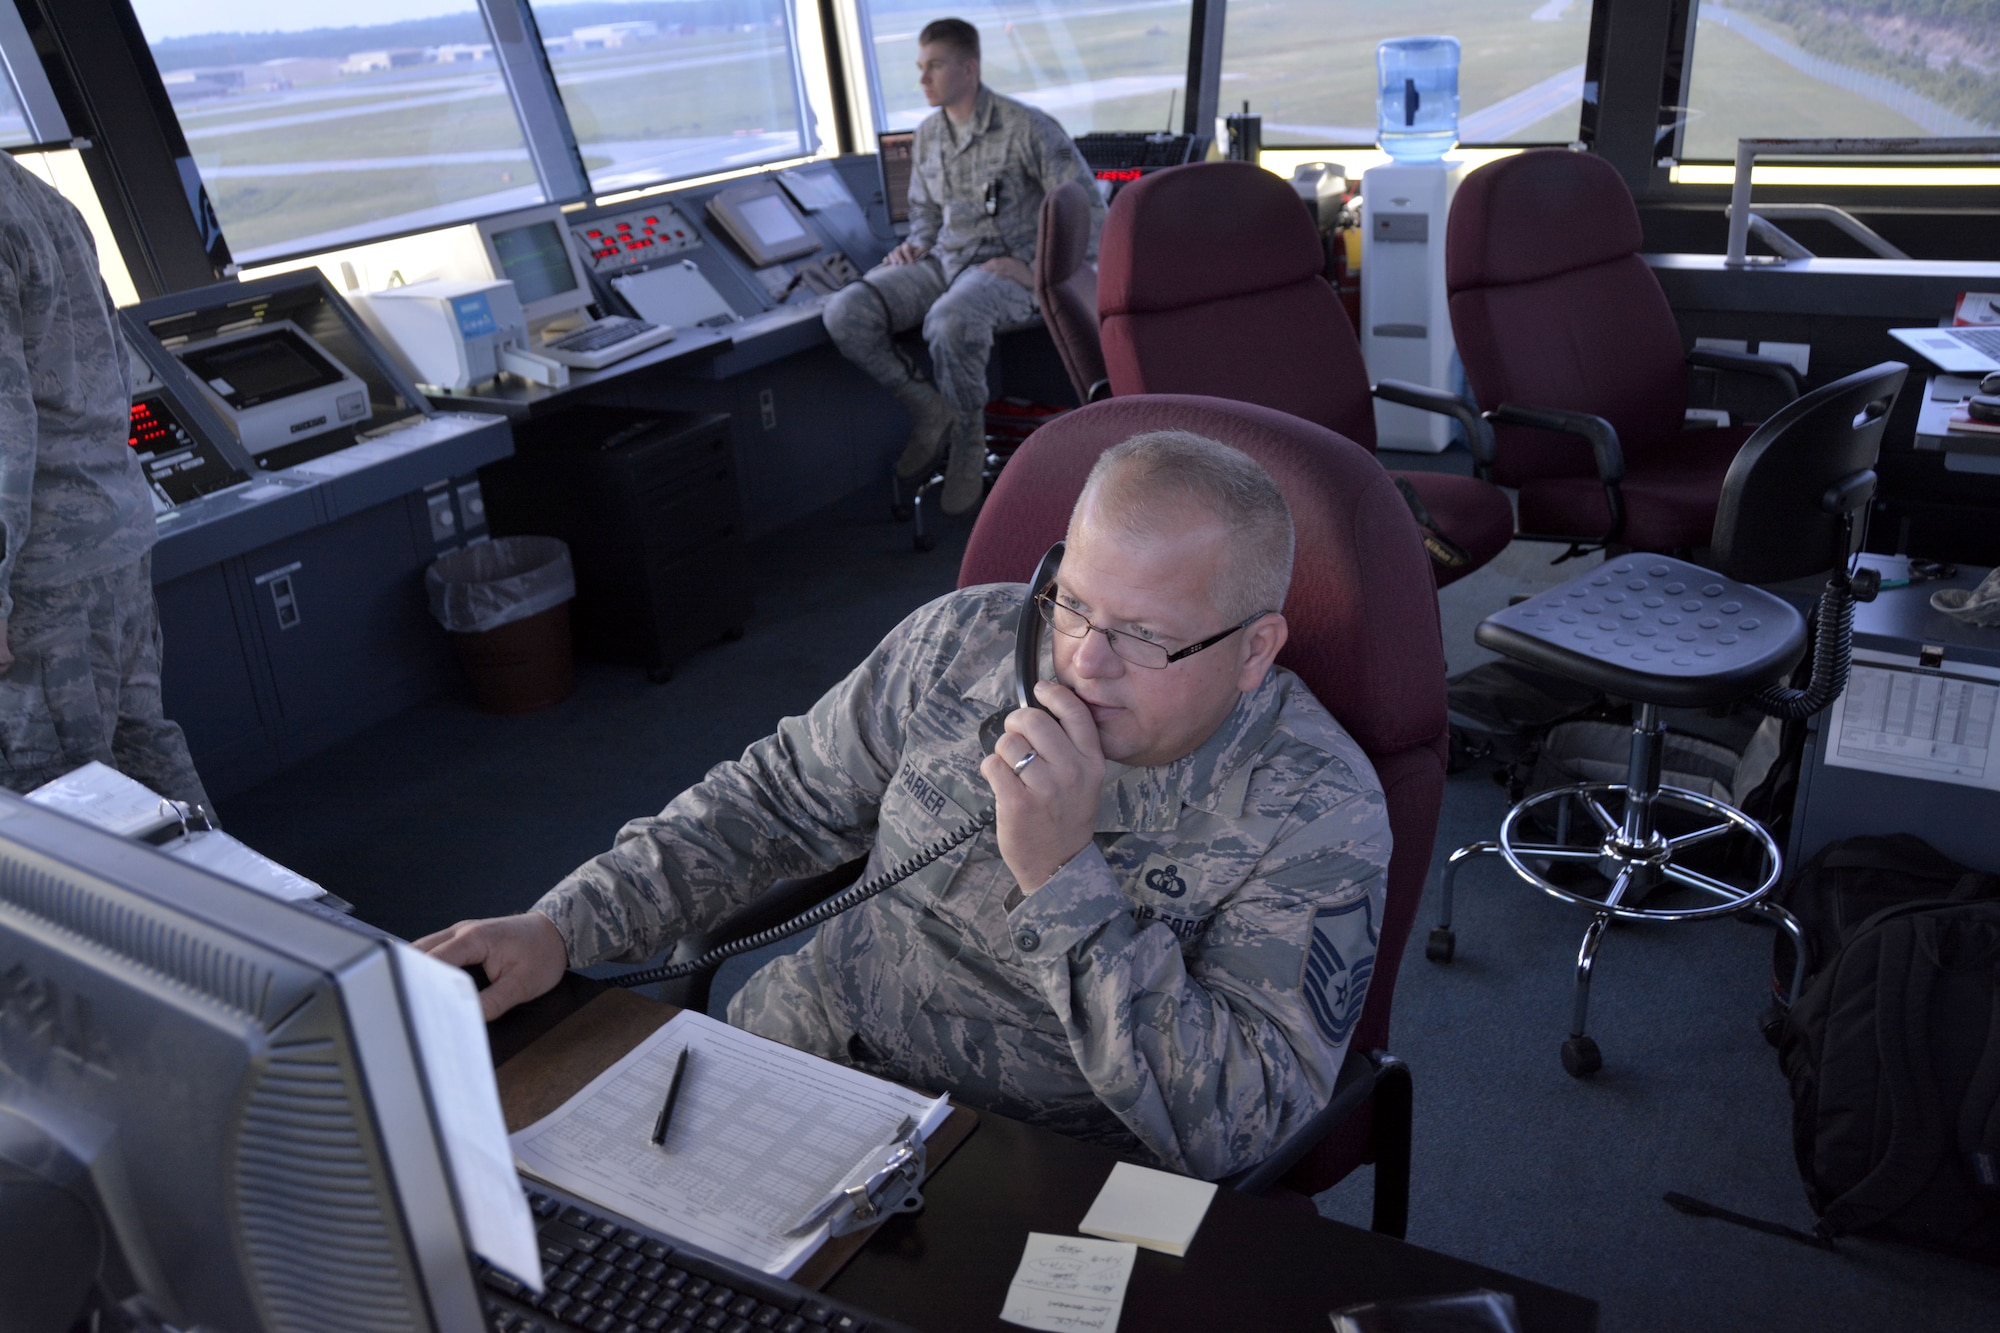 235th Air Traffic Control Squadron, Tower Watch Supervisor, Master Sgt. Tony L. Parker, makes entries in the daily event log as Senior Airman James D. Bellissimo, ground controller; surveys taxi ways at Stanly County Airport, New London, N.C., July 8, 2015. The 235th ATCs provides air traffic control services for all civilian and military aircraft at the Stanly County Airport, New London, N.C. (U.S. Air National Guard photo by Master Sgt. Patricia F. Moran, 145th Public Affairs/Released) 